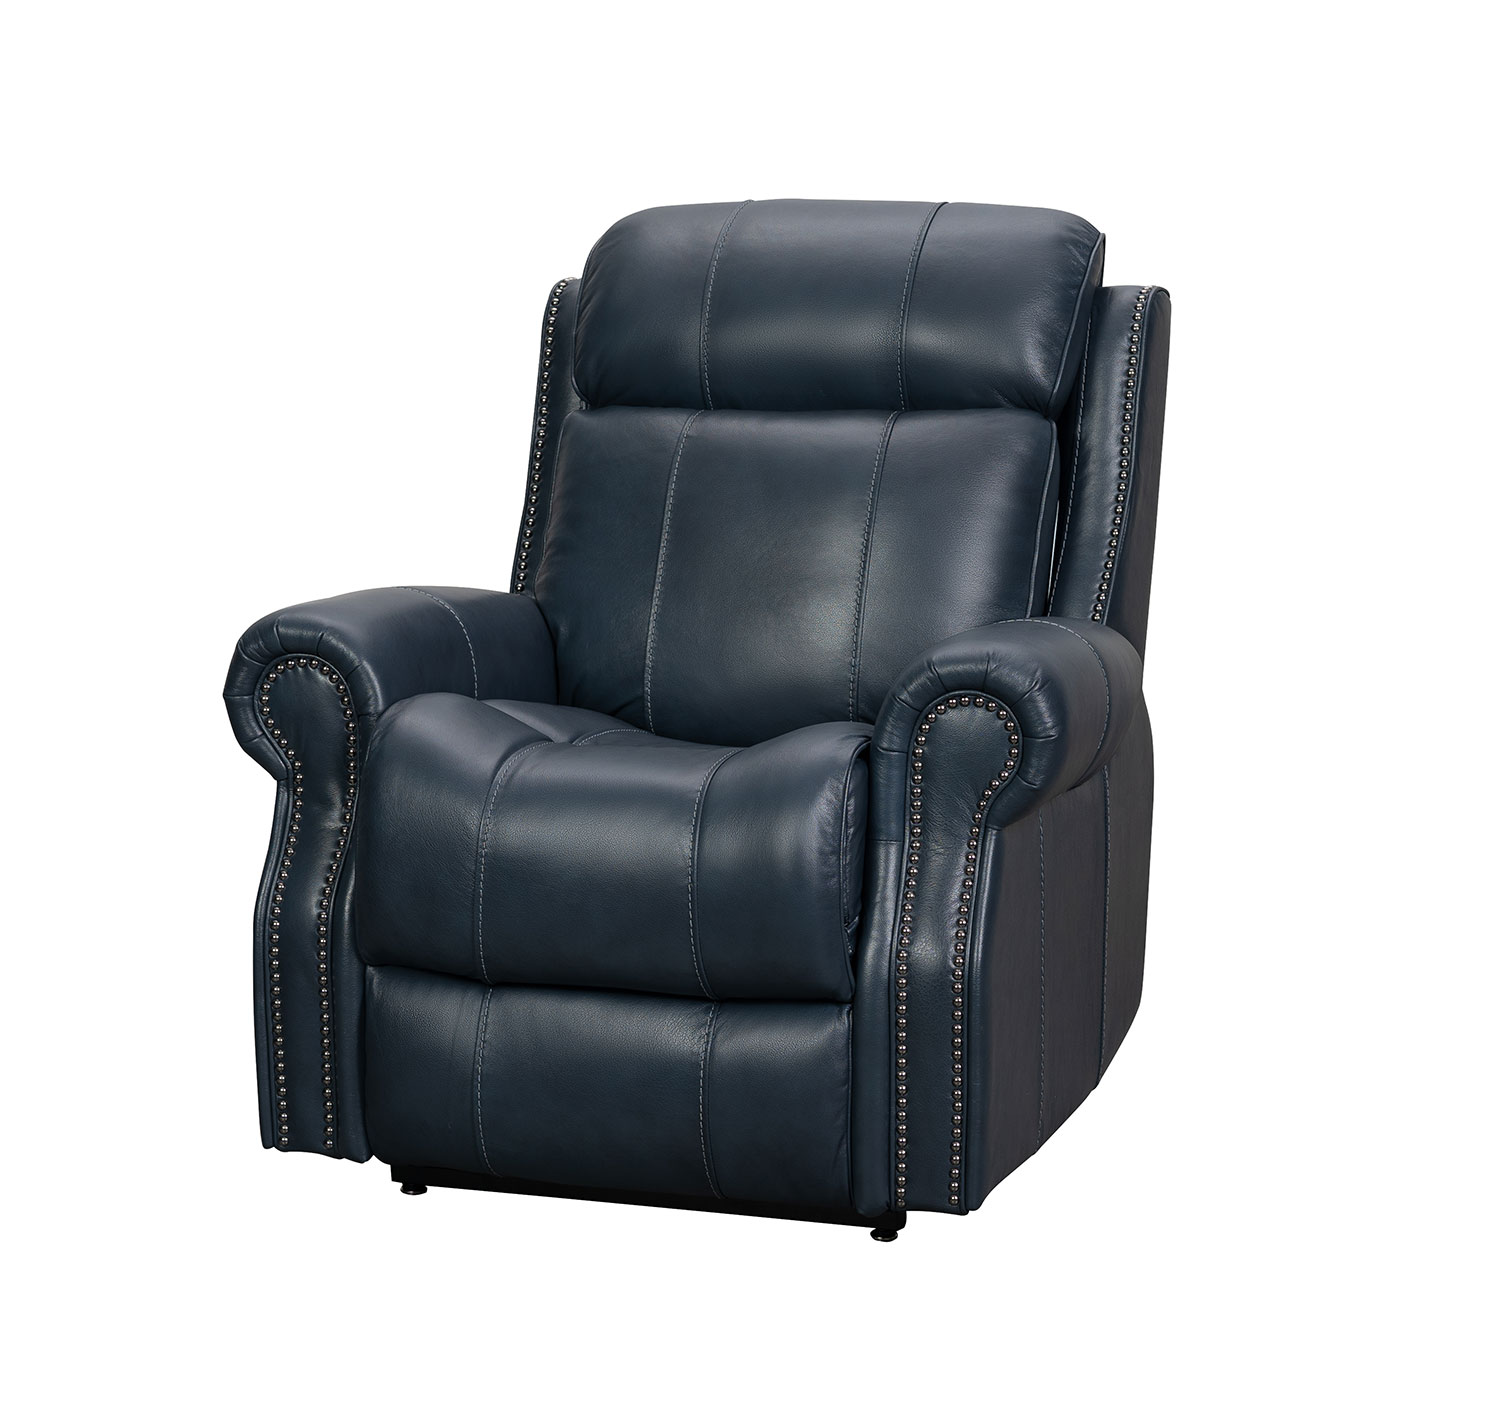 Barcalounger Langston Lift Chair Recliner with Power Head Rest and Lumbar - Venzia Blue/Leather Match